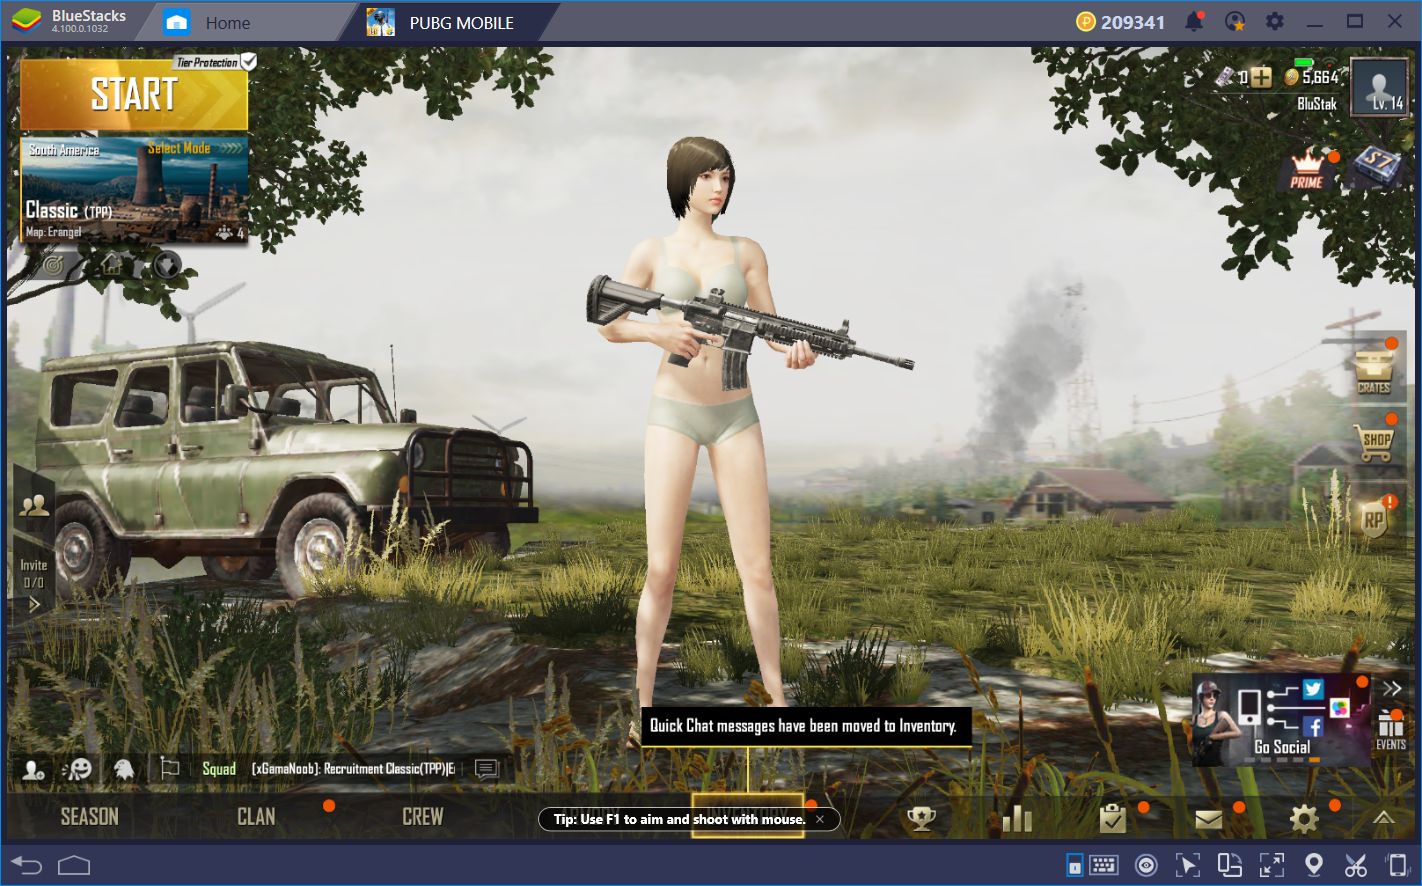 Bluestacks Update Play Pubg Mobile On Pc With Full Hd 1080p Qhd 1440p Display